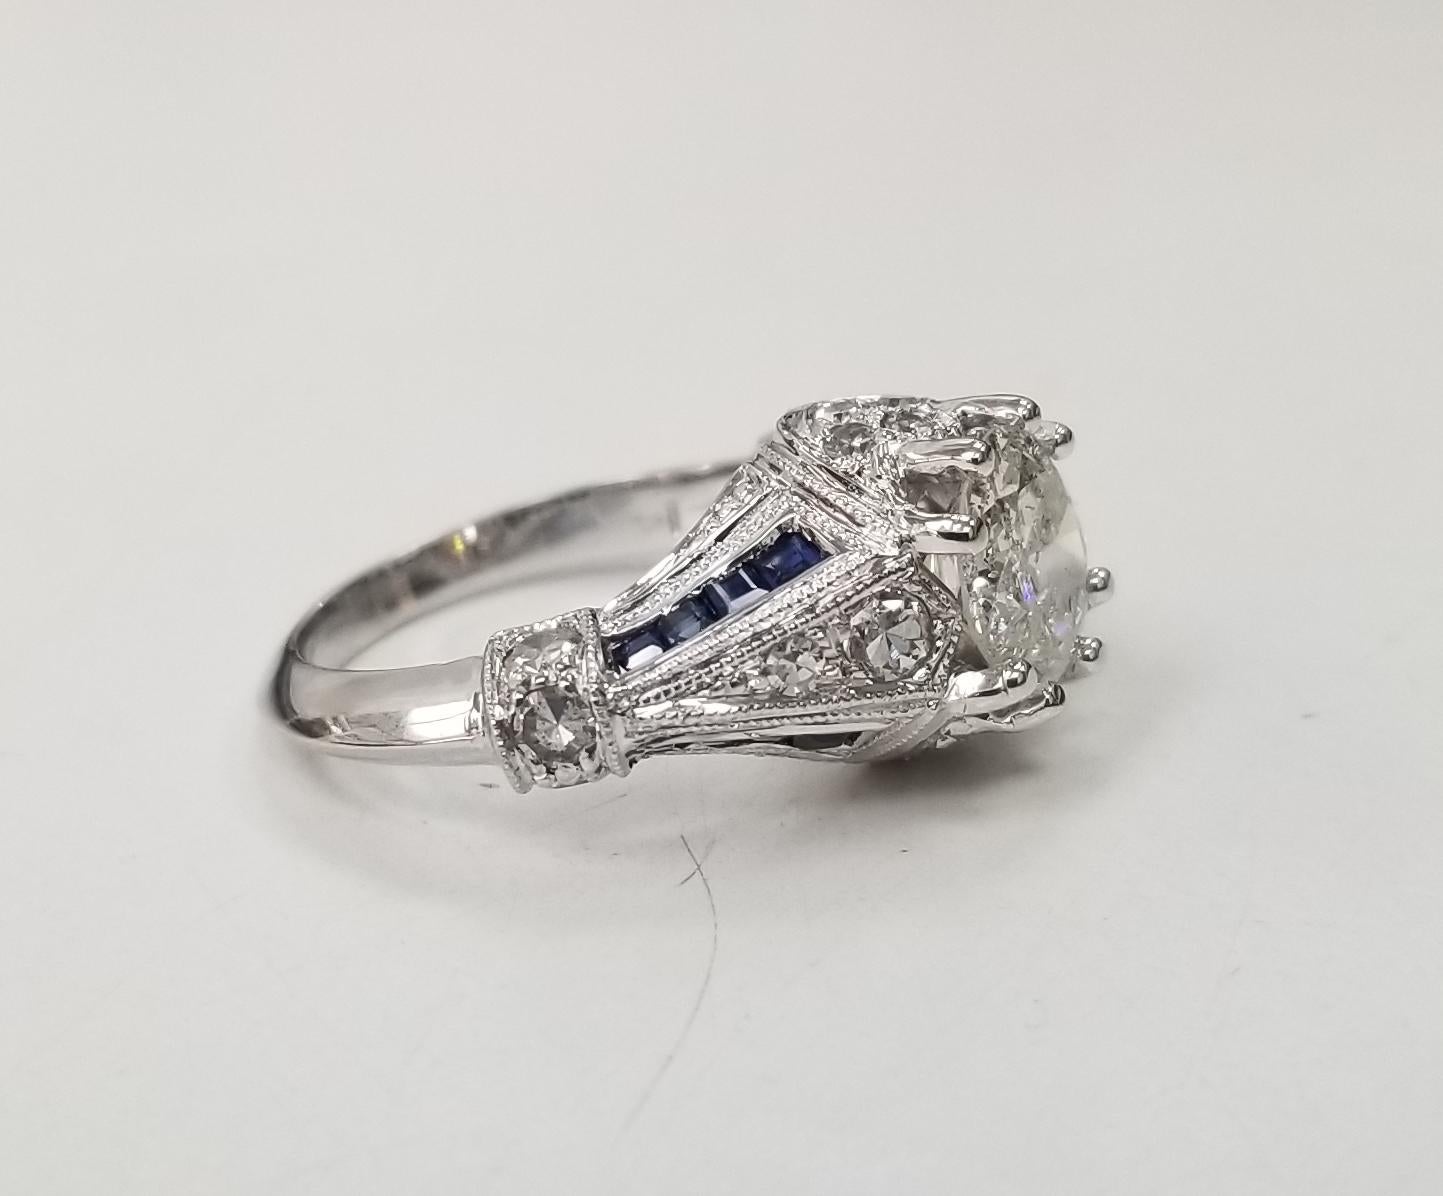 Art Deco inspired 14k white gold with diamonds-sapphires, containing 1 euro cut diamond: color 